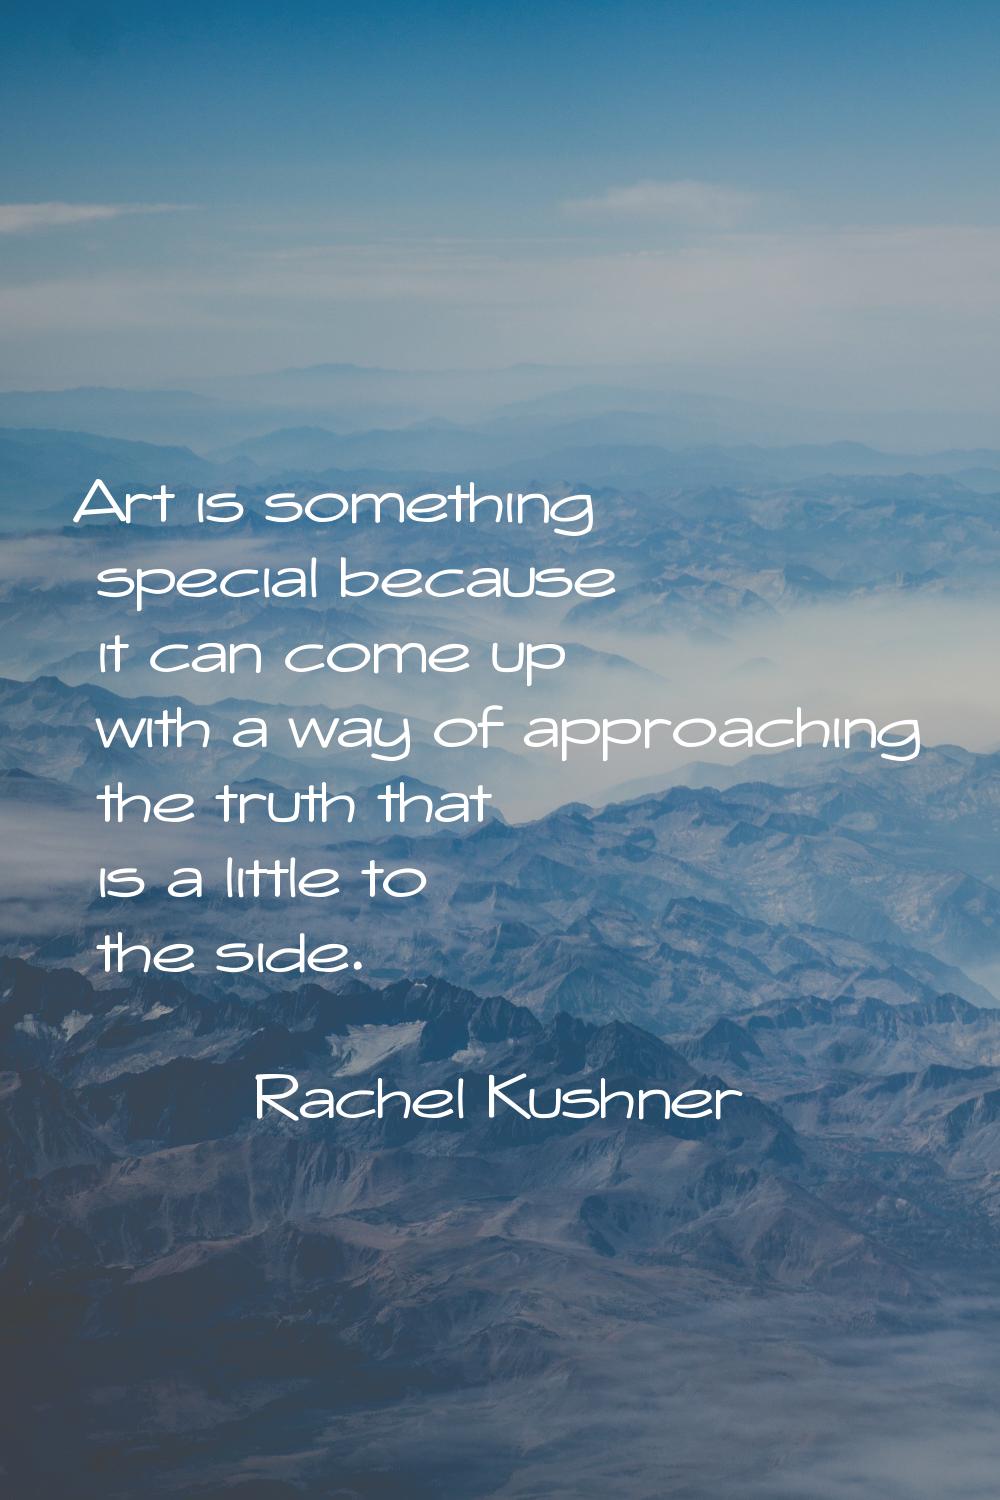 Art is something special because it can come up with a way of approaching the truth that is a littl